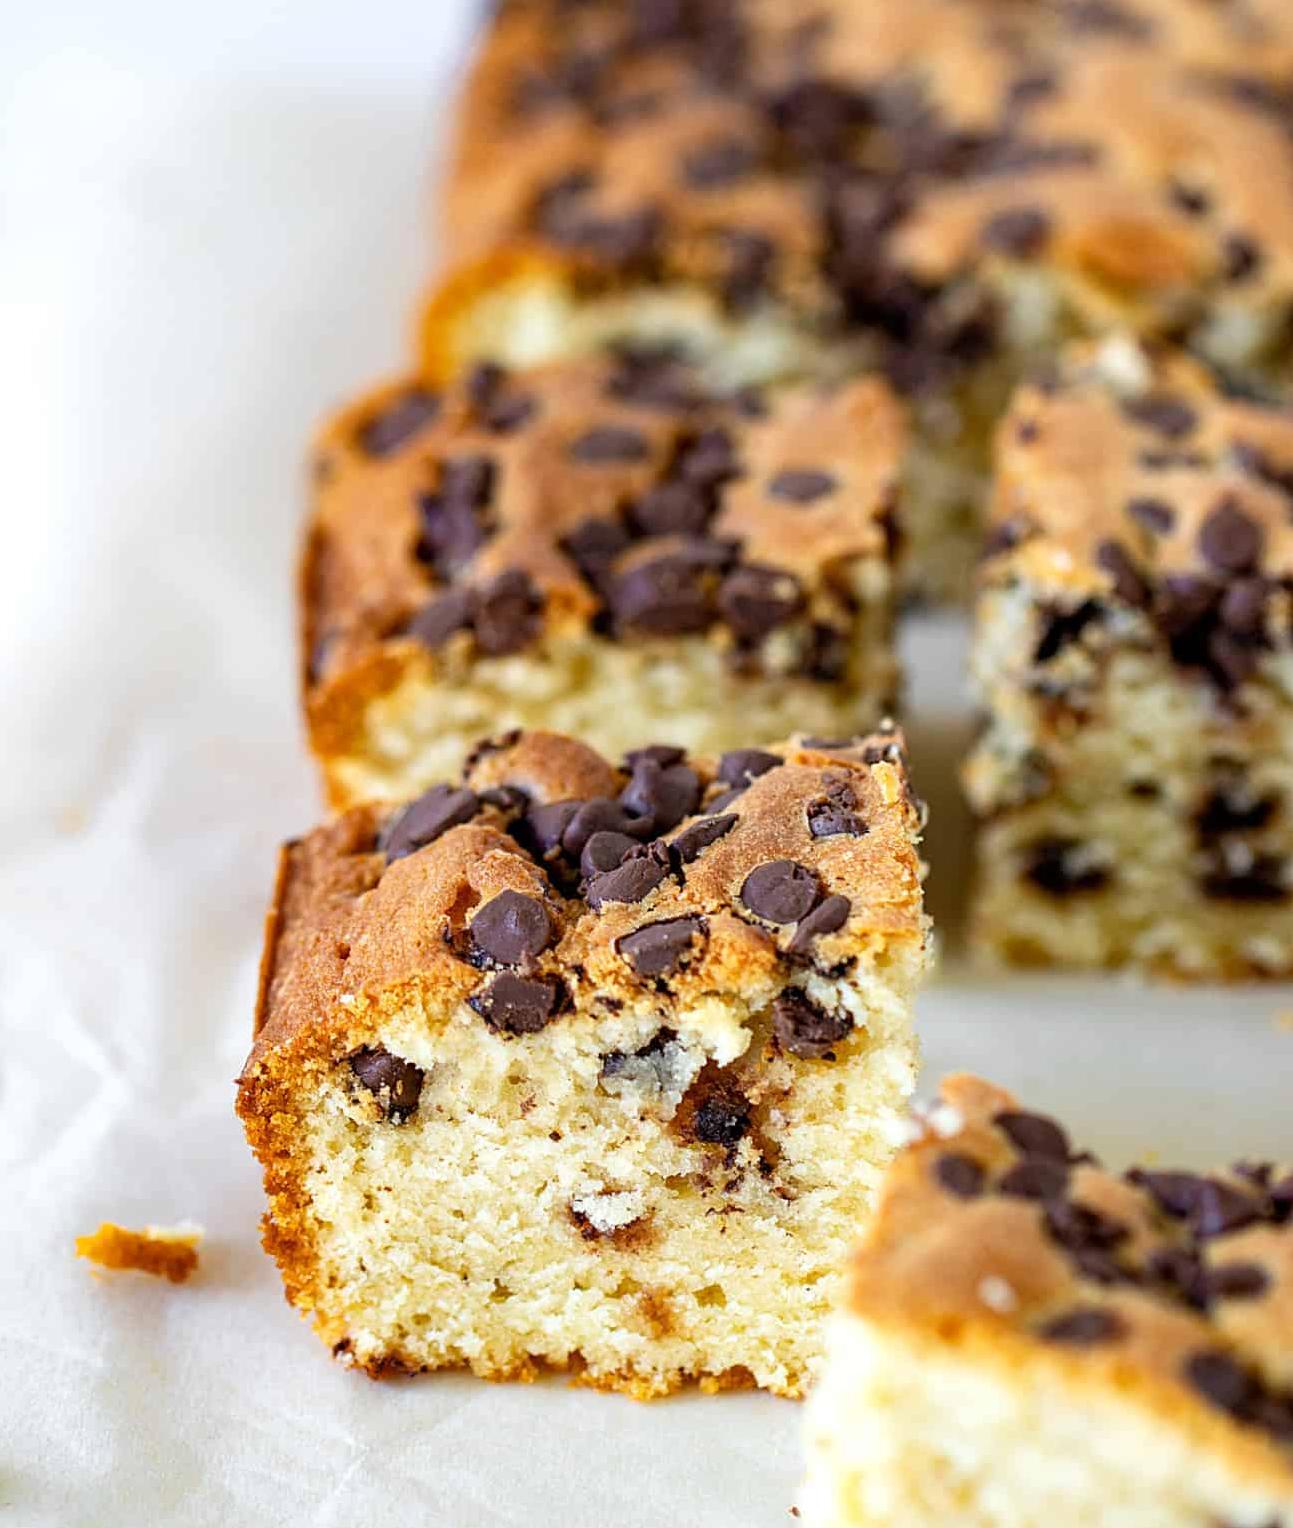  Whether it's for dessert or just a sweet snack, this chocolate chip pound cake is always a crowd-pleaser.